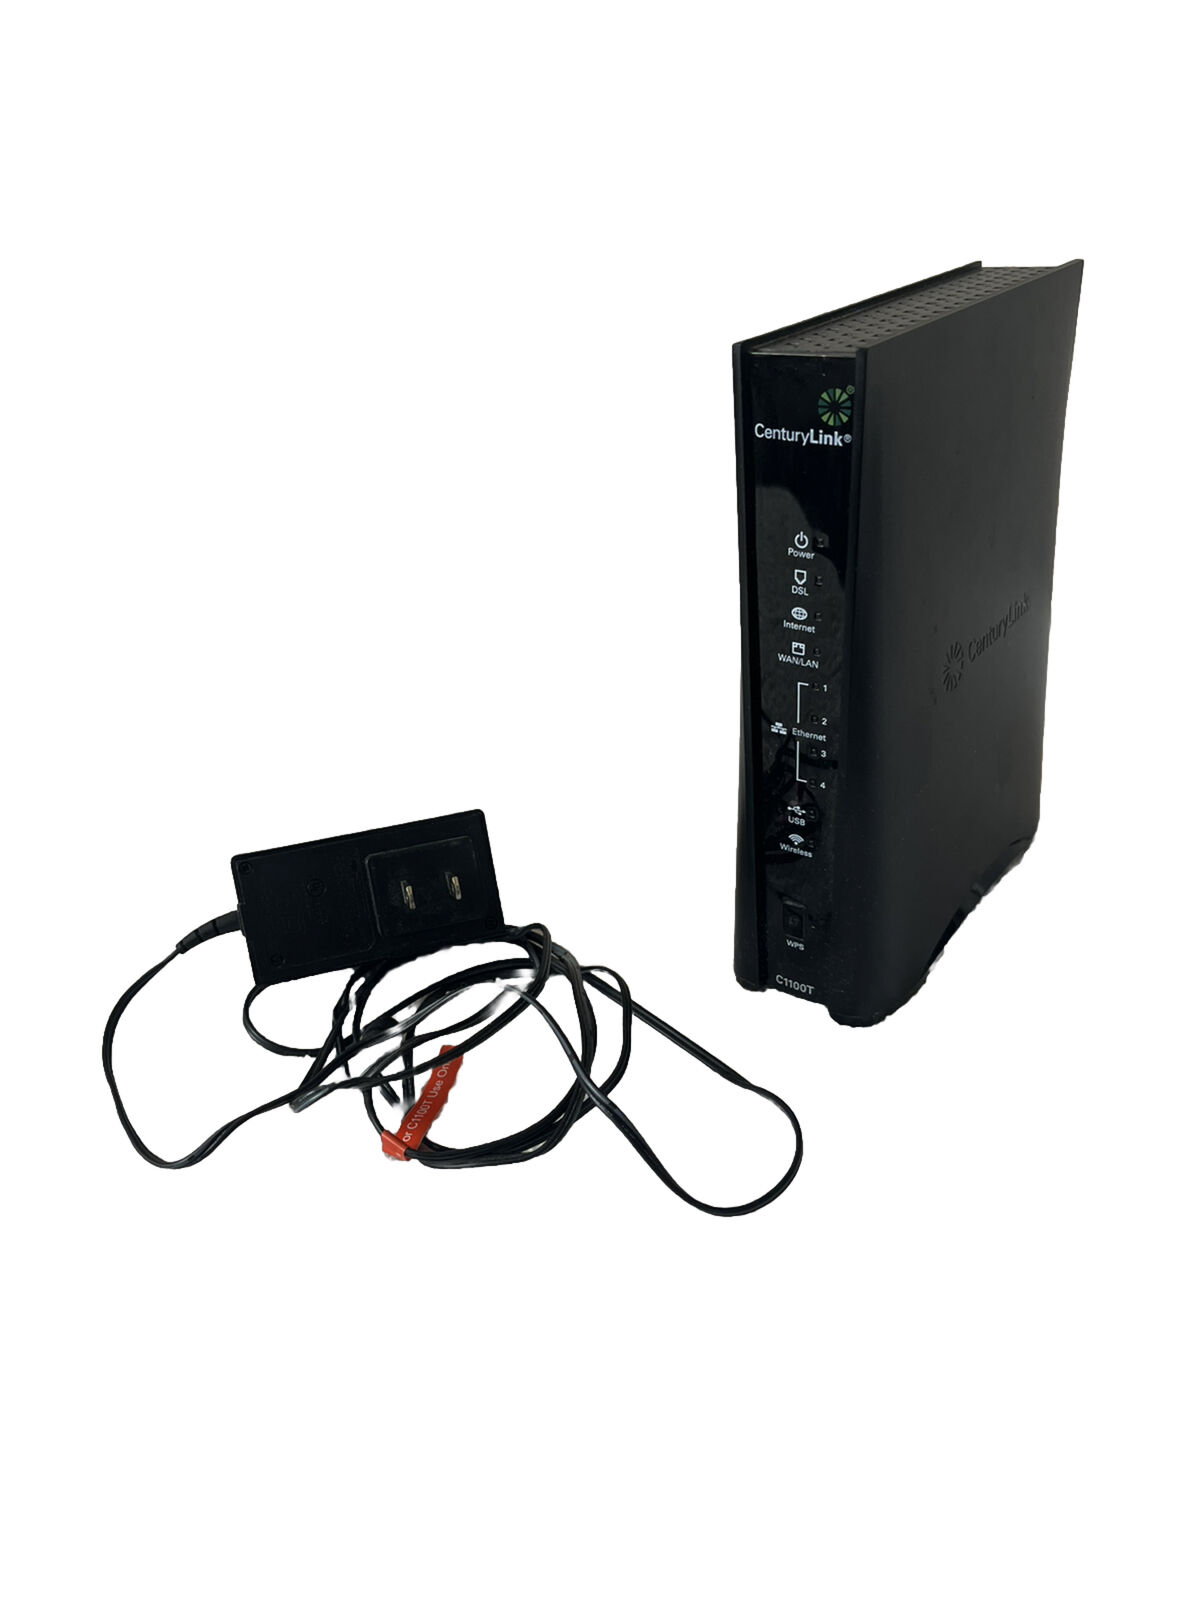 Centurylink C1100T 300 Mbps 4 Port 10/100 Wireless N Router With Power Cord